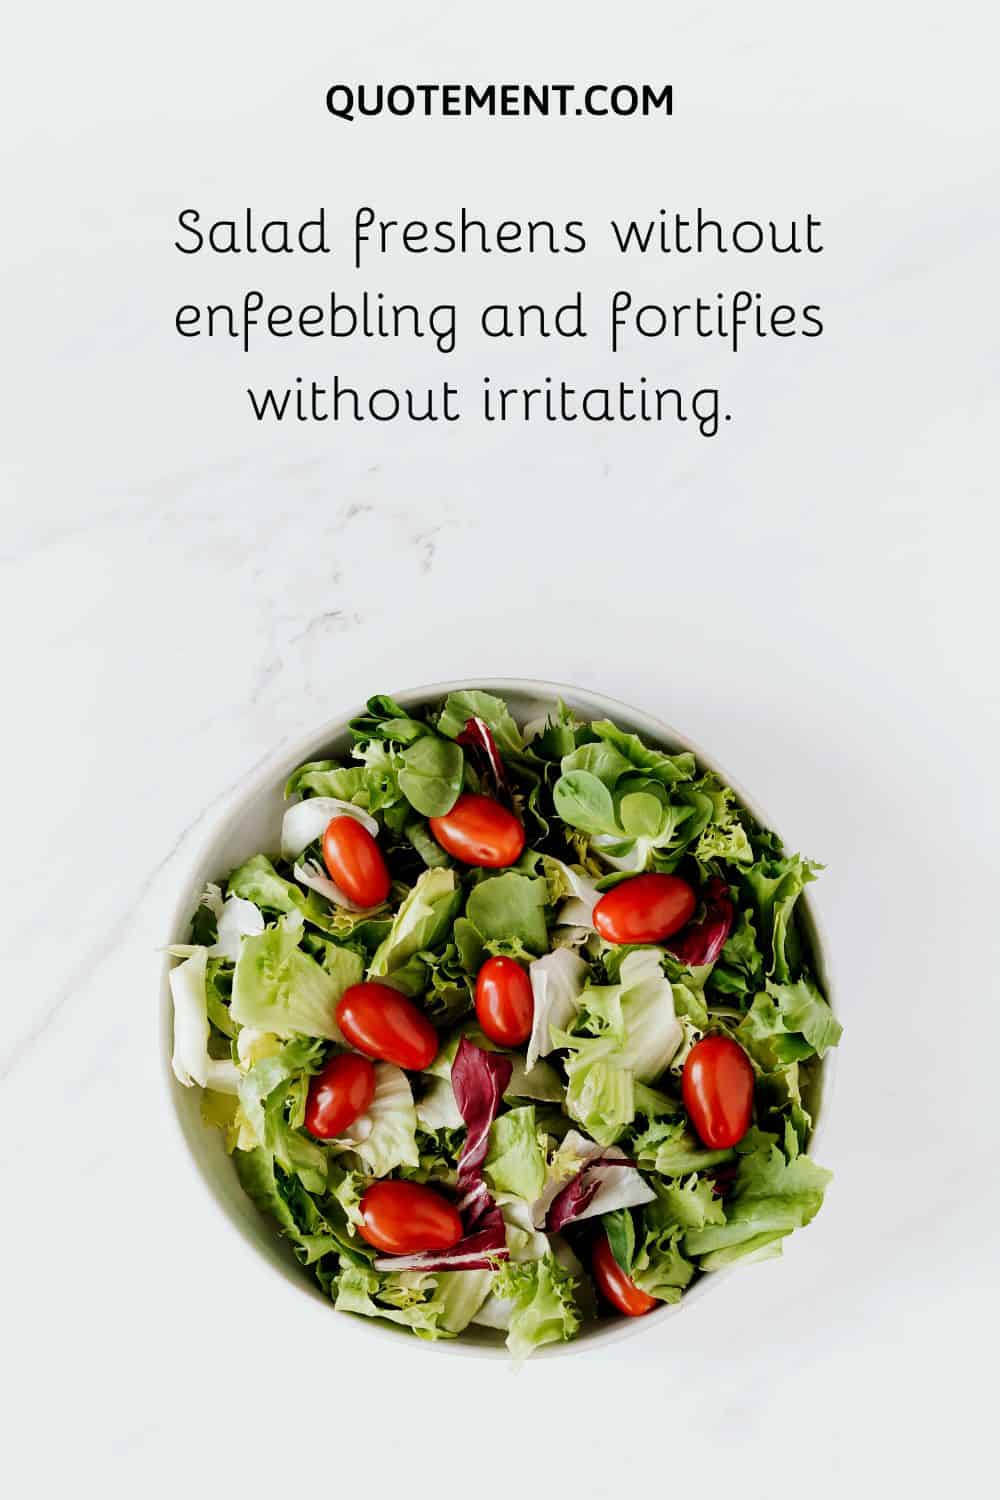 Salad freshens without enfeebling and fortifies without irritating